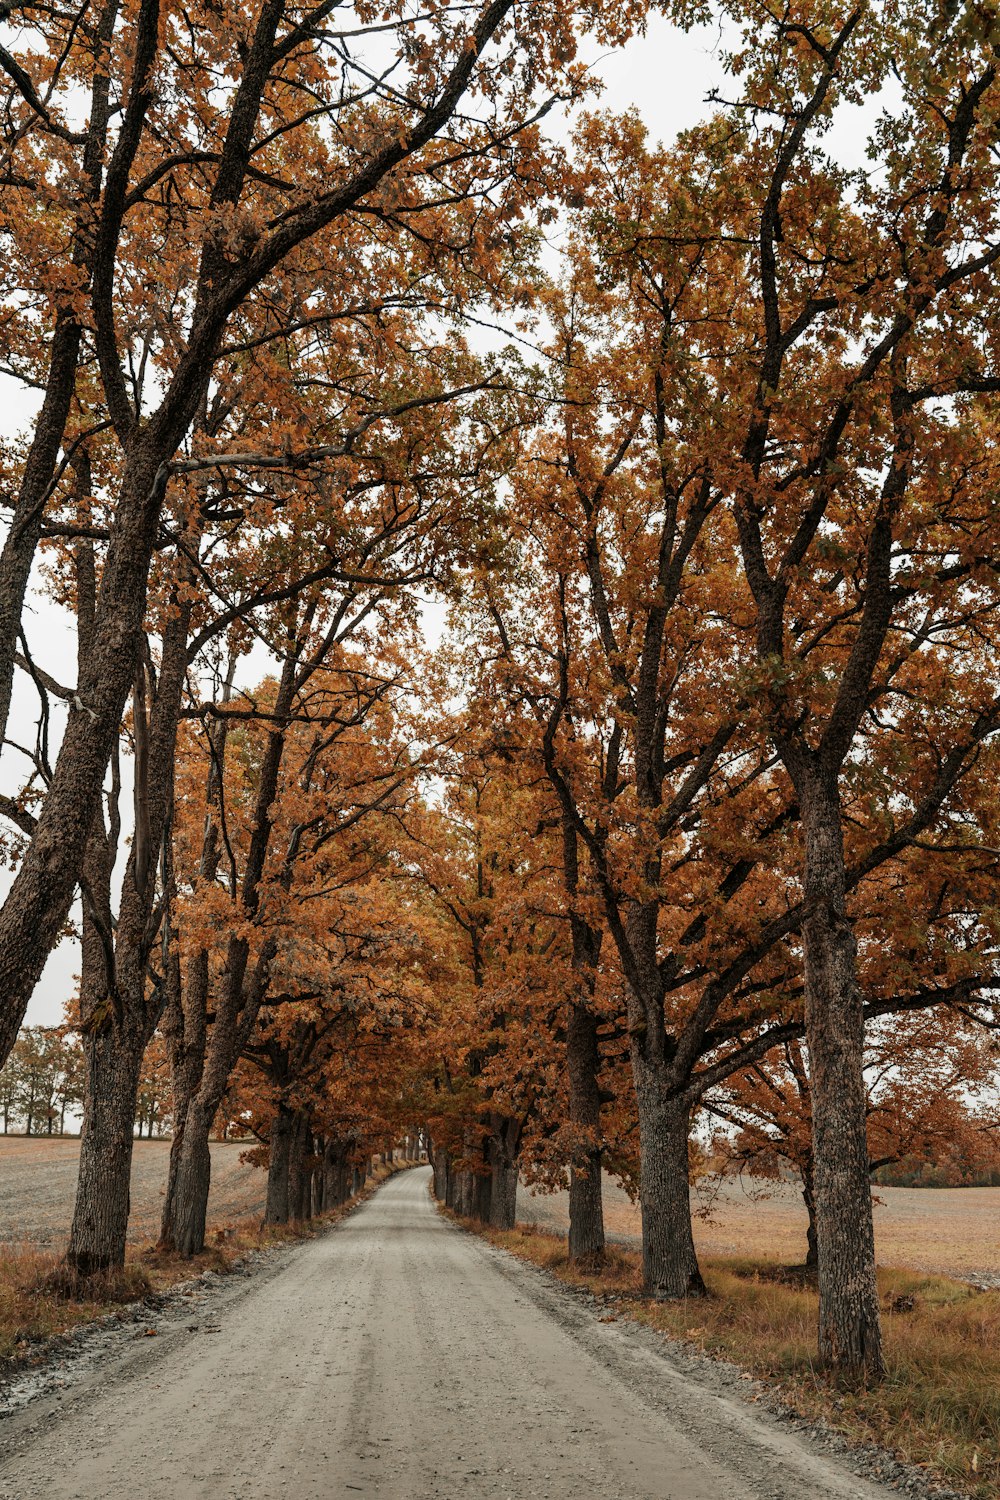 a dirt road surrounded by trees with orange leaves